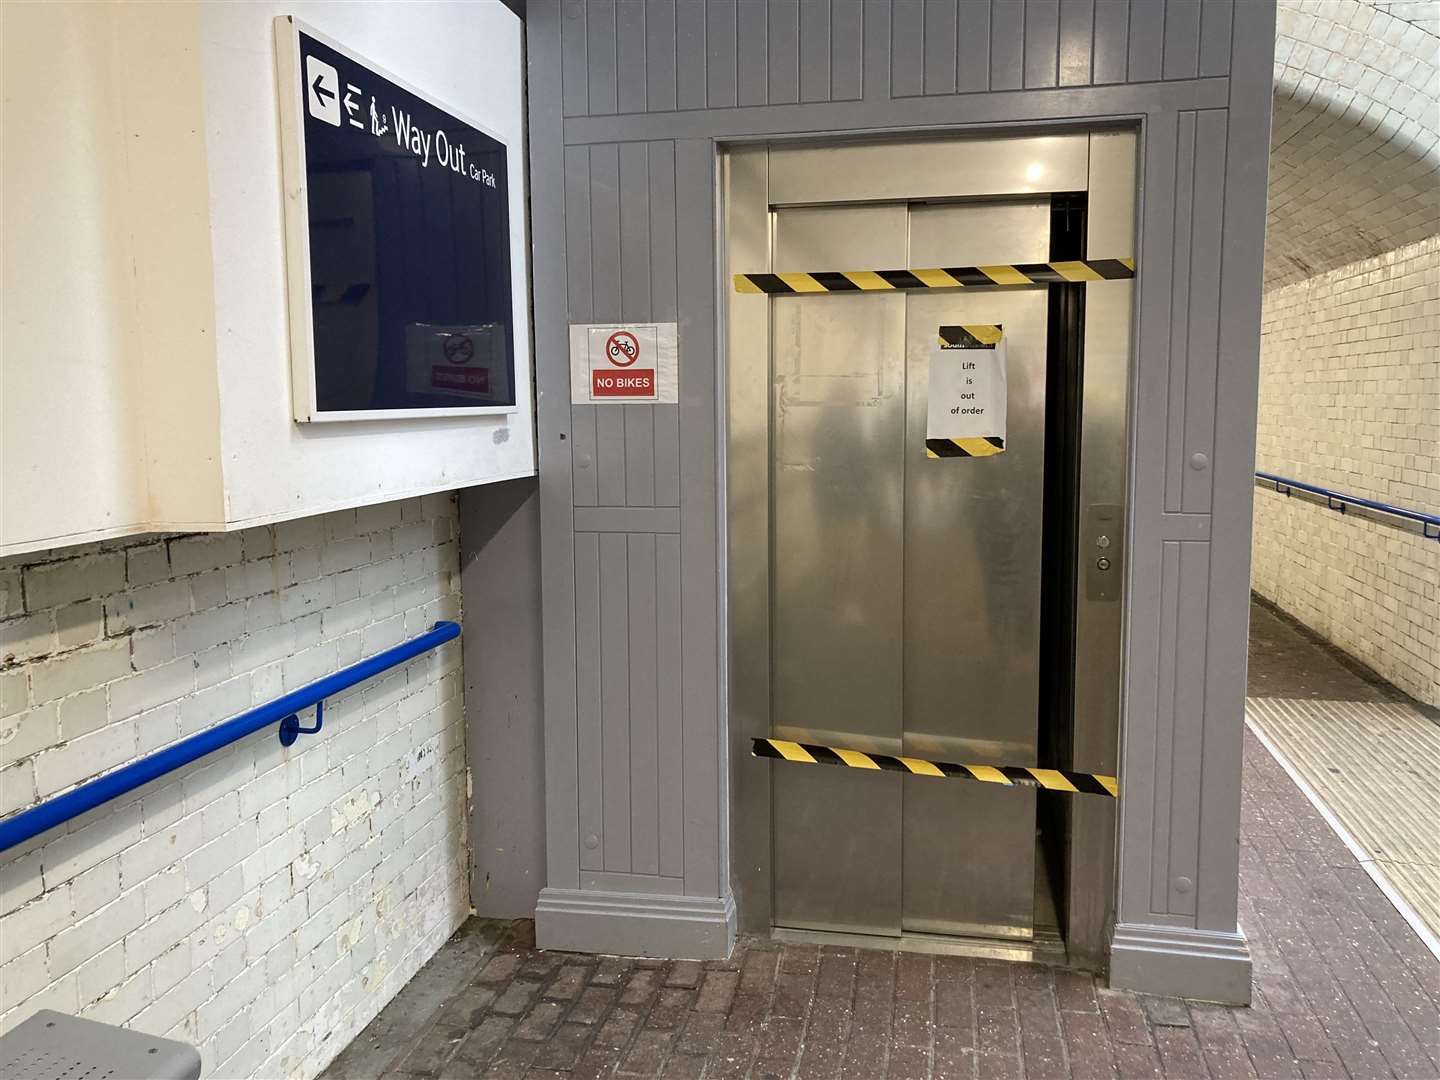 The other lift at Faversham train station, which currently also bears an 'out of order' sign